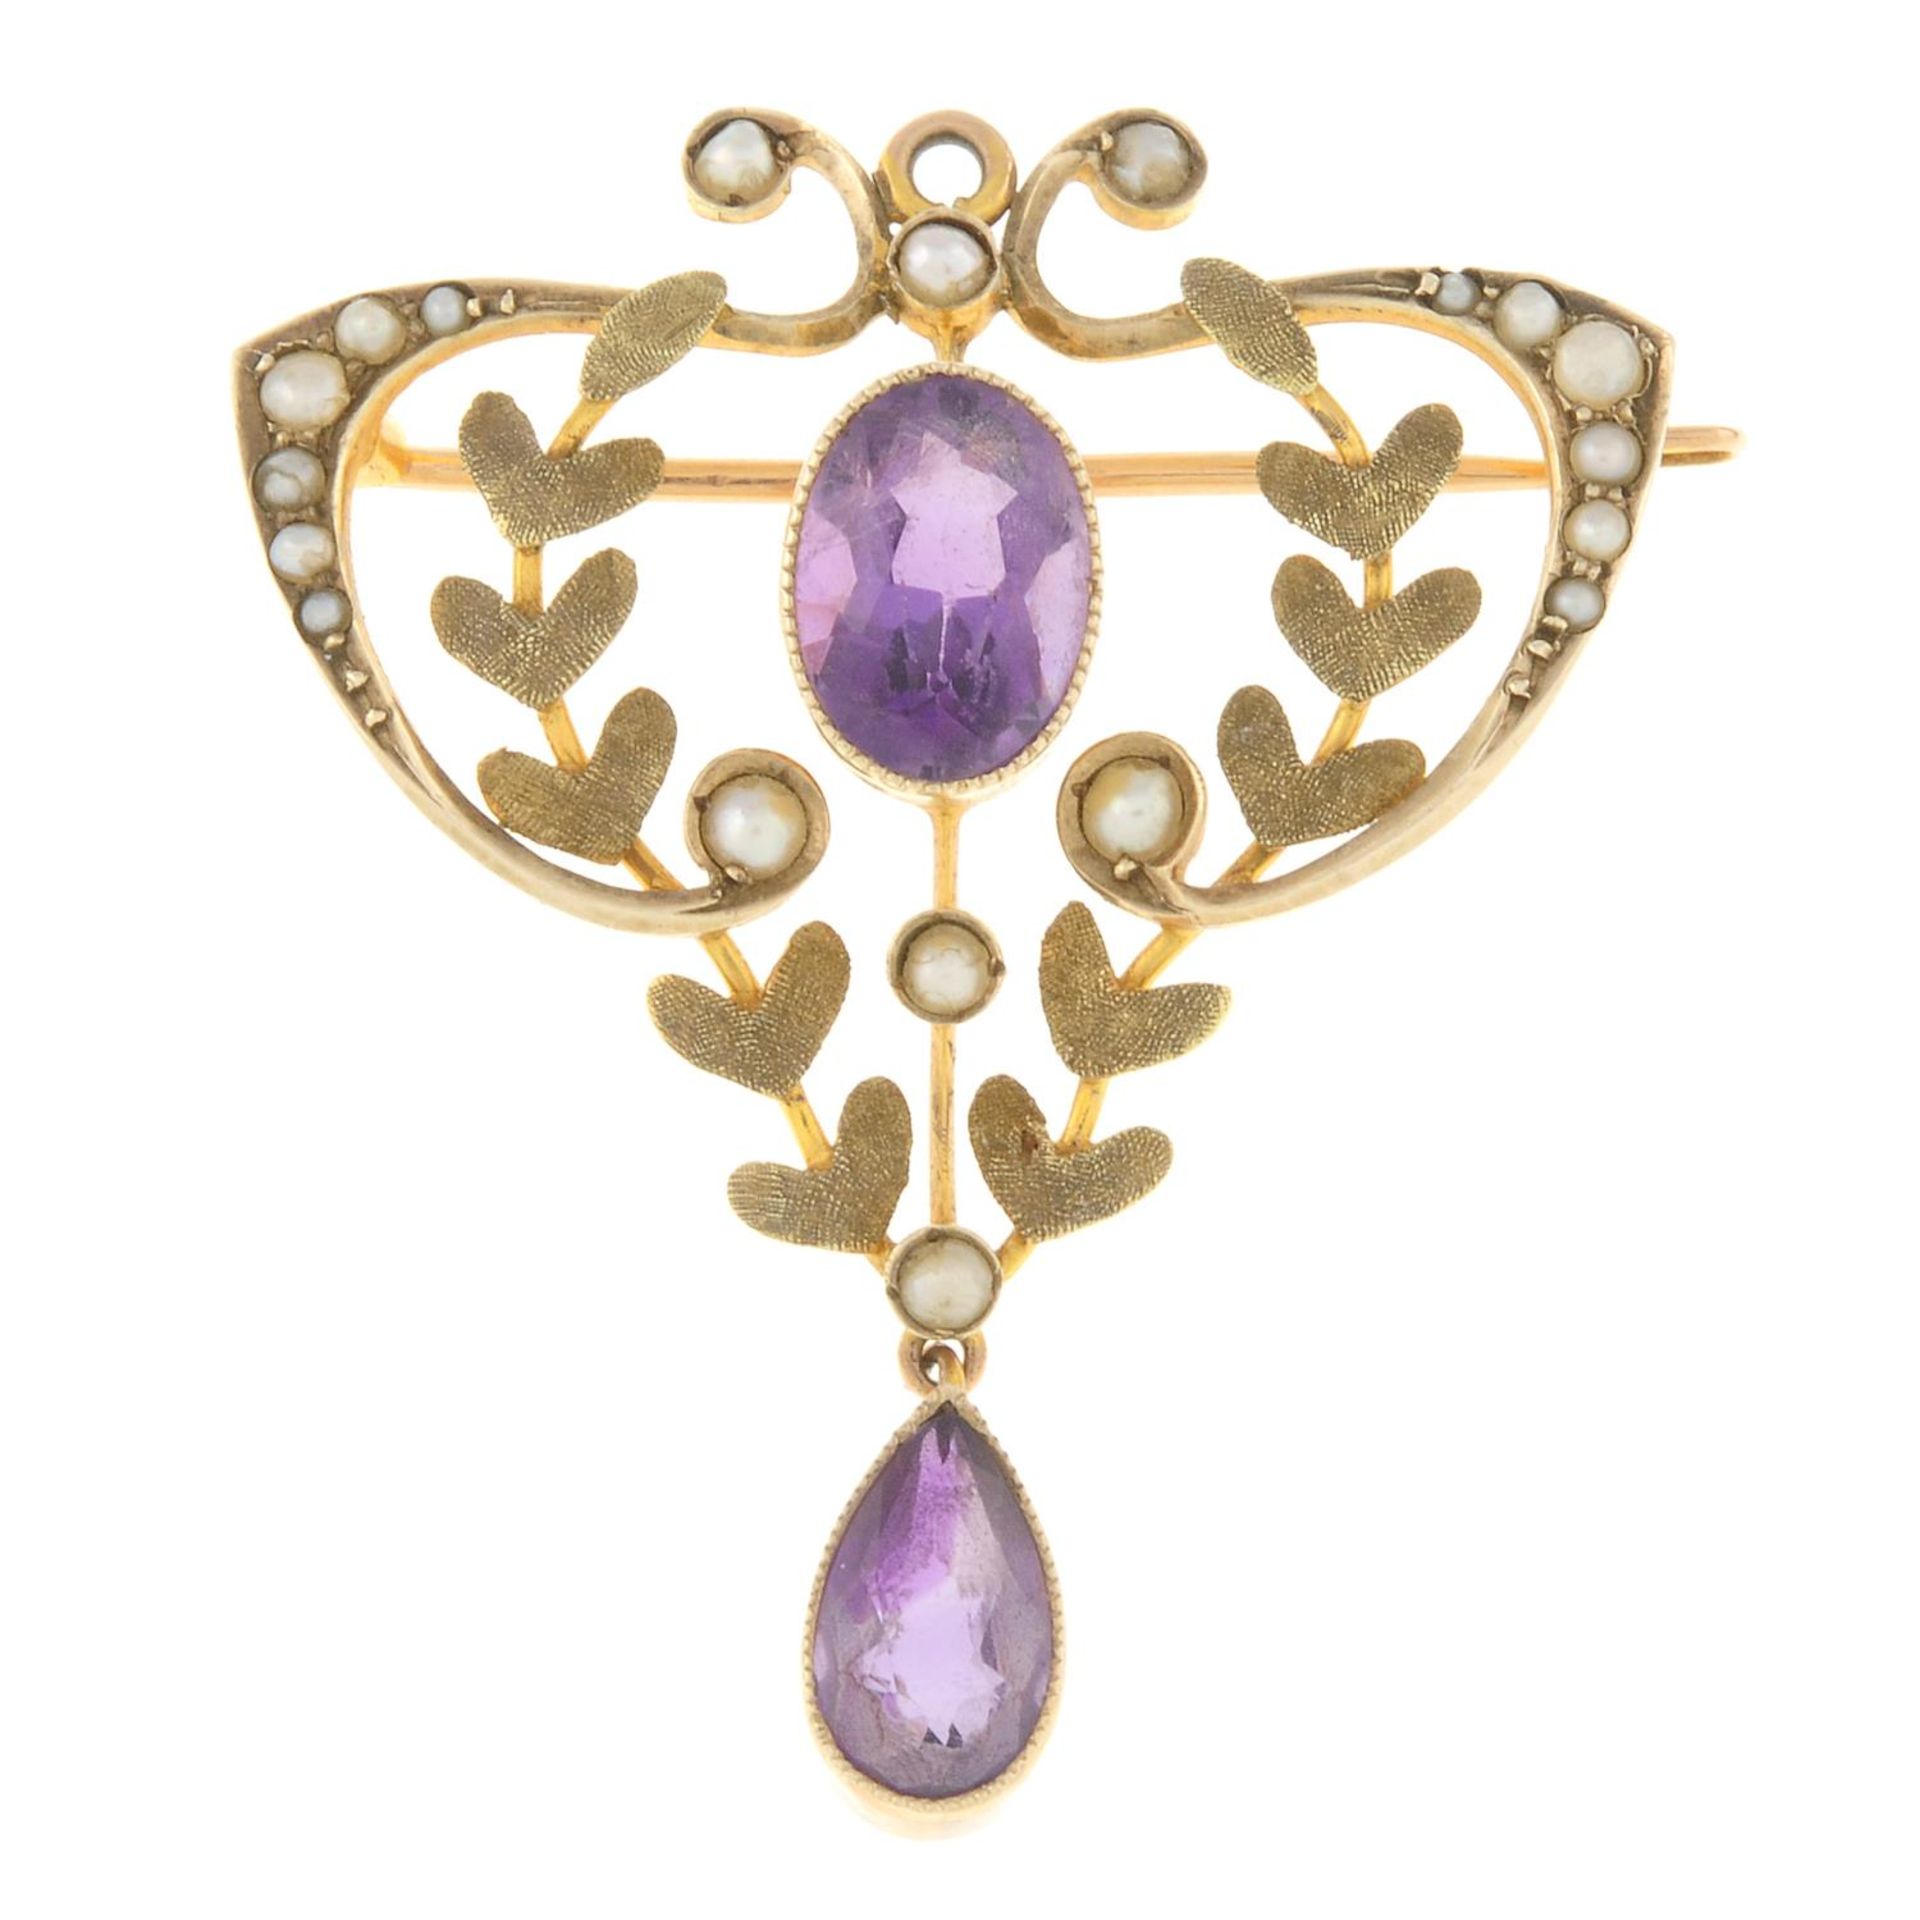 An early 20th century 9ct gold amethyst and split pearl brooch.May be worn as a pendant.